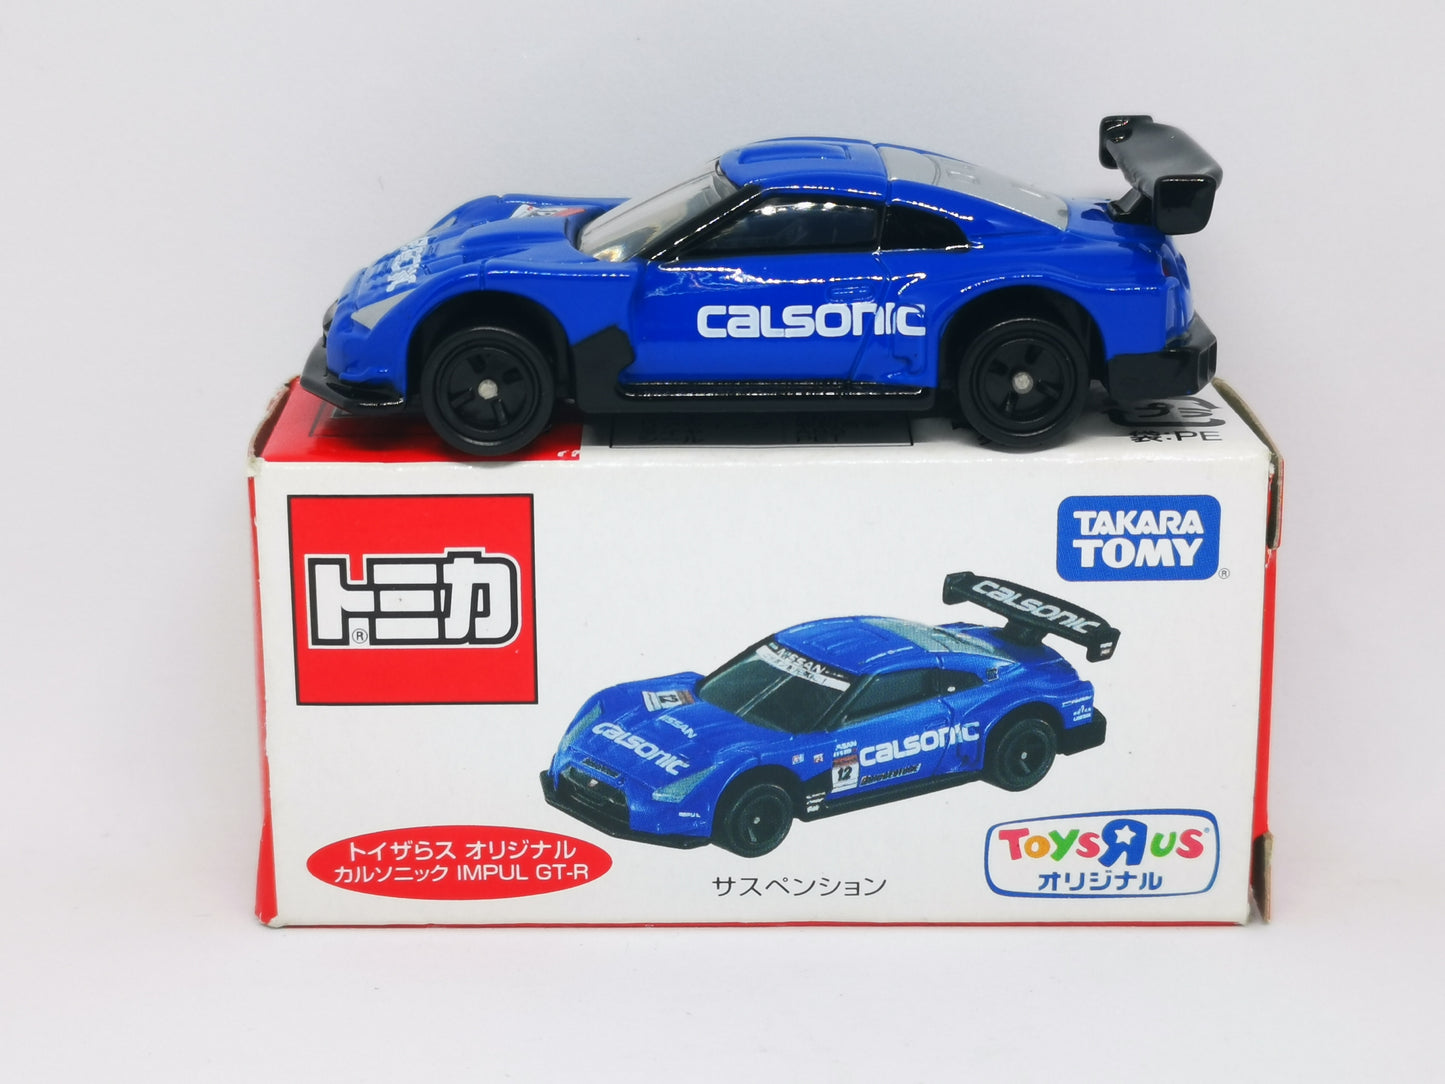 Tomica Toys "R" us Exclusive Nismo Nissan Calsonic Impul GT-R Super GT #12